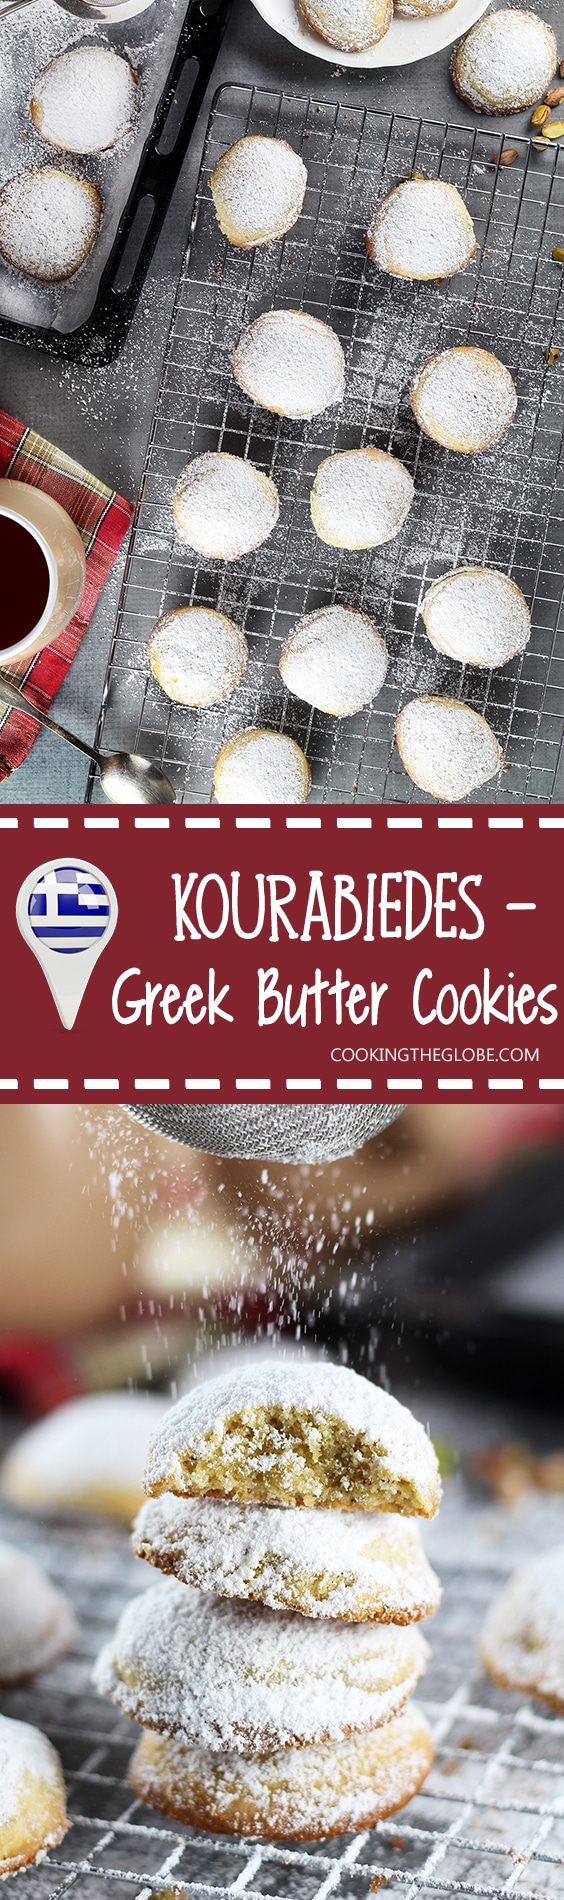 These Greek Butter Cookies (Kourabiedes) are usually made on Christmas or other holidays. They are tender, buttery, and stuffed with pistachios! | cookingtheglobe.com